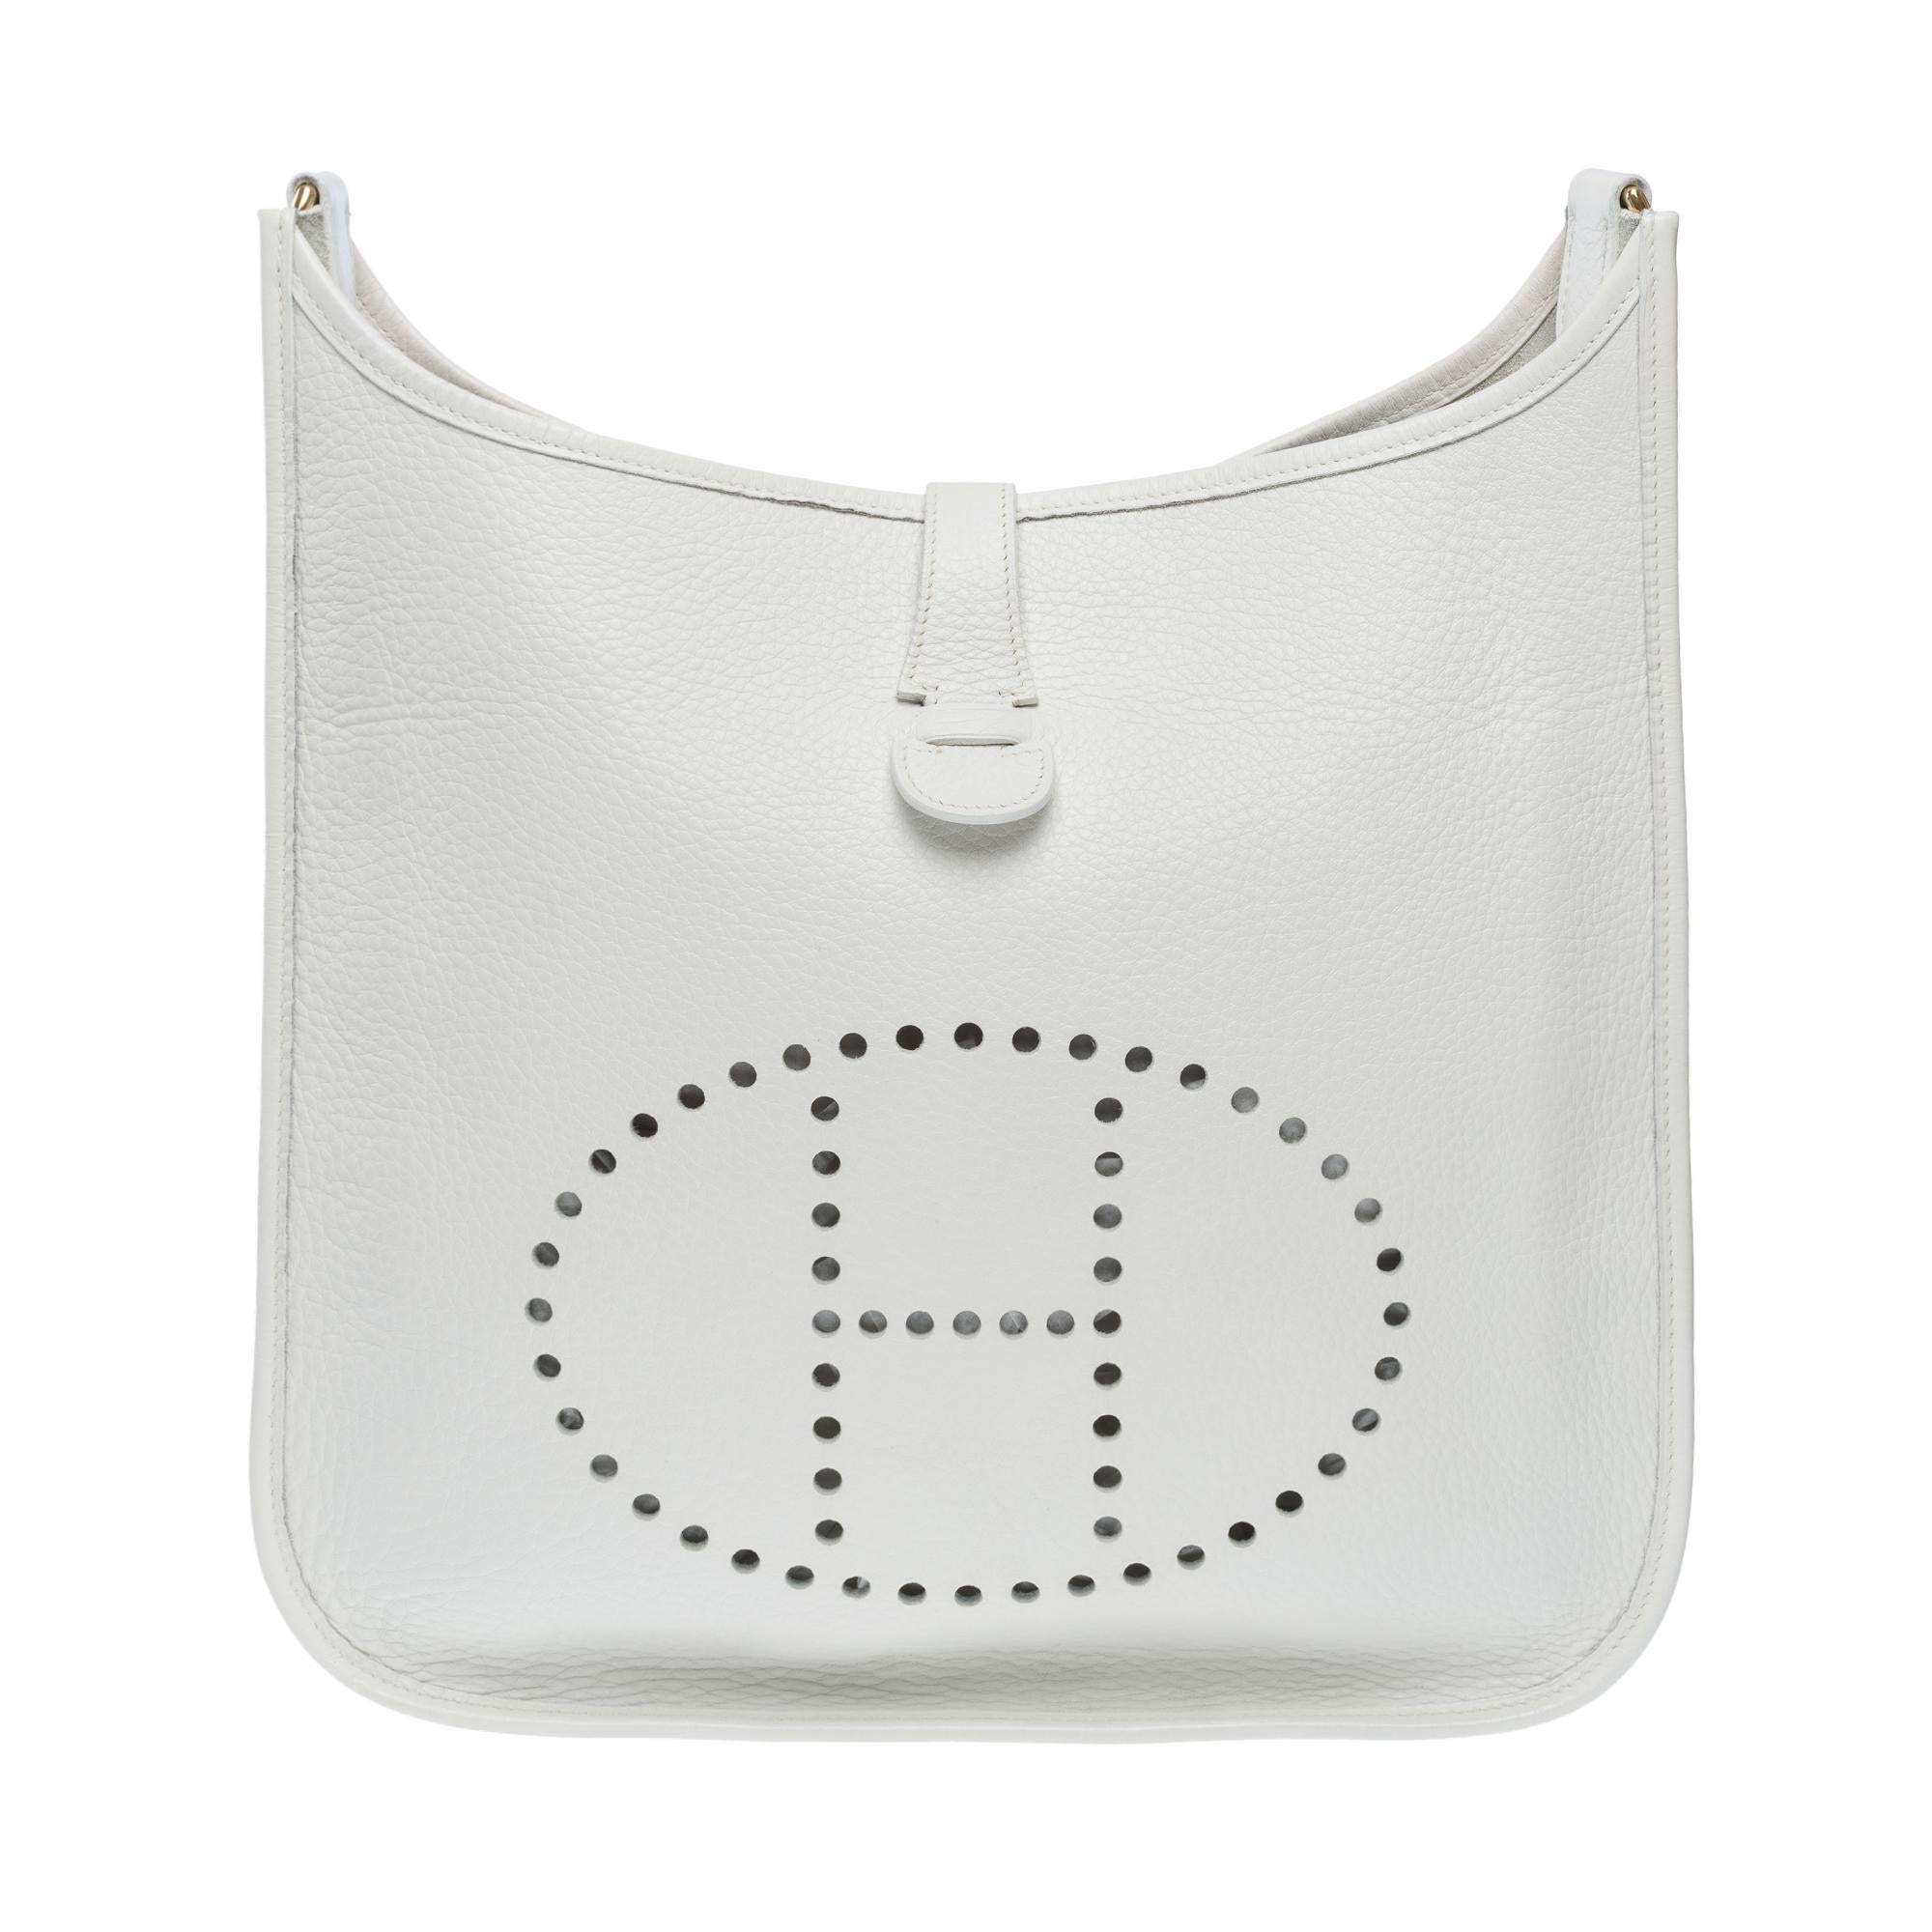 Women's Hermès Evelyne 33 (GM)  shoulder bag in White Taurillon Clemence leather, GHW